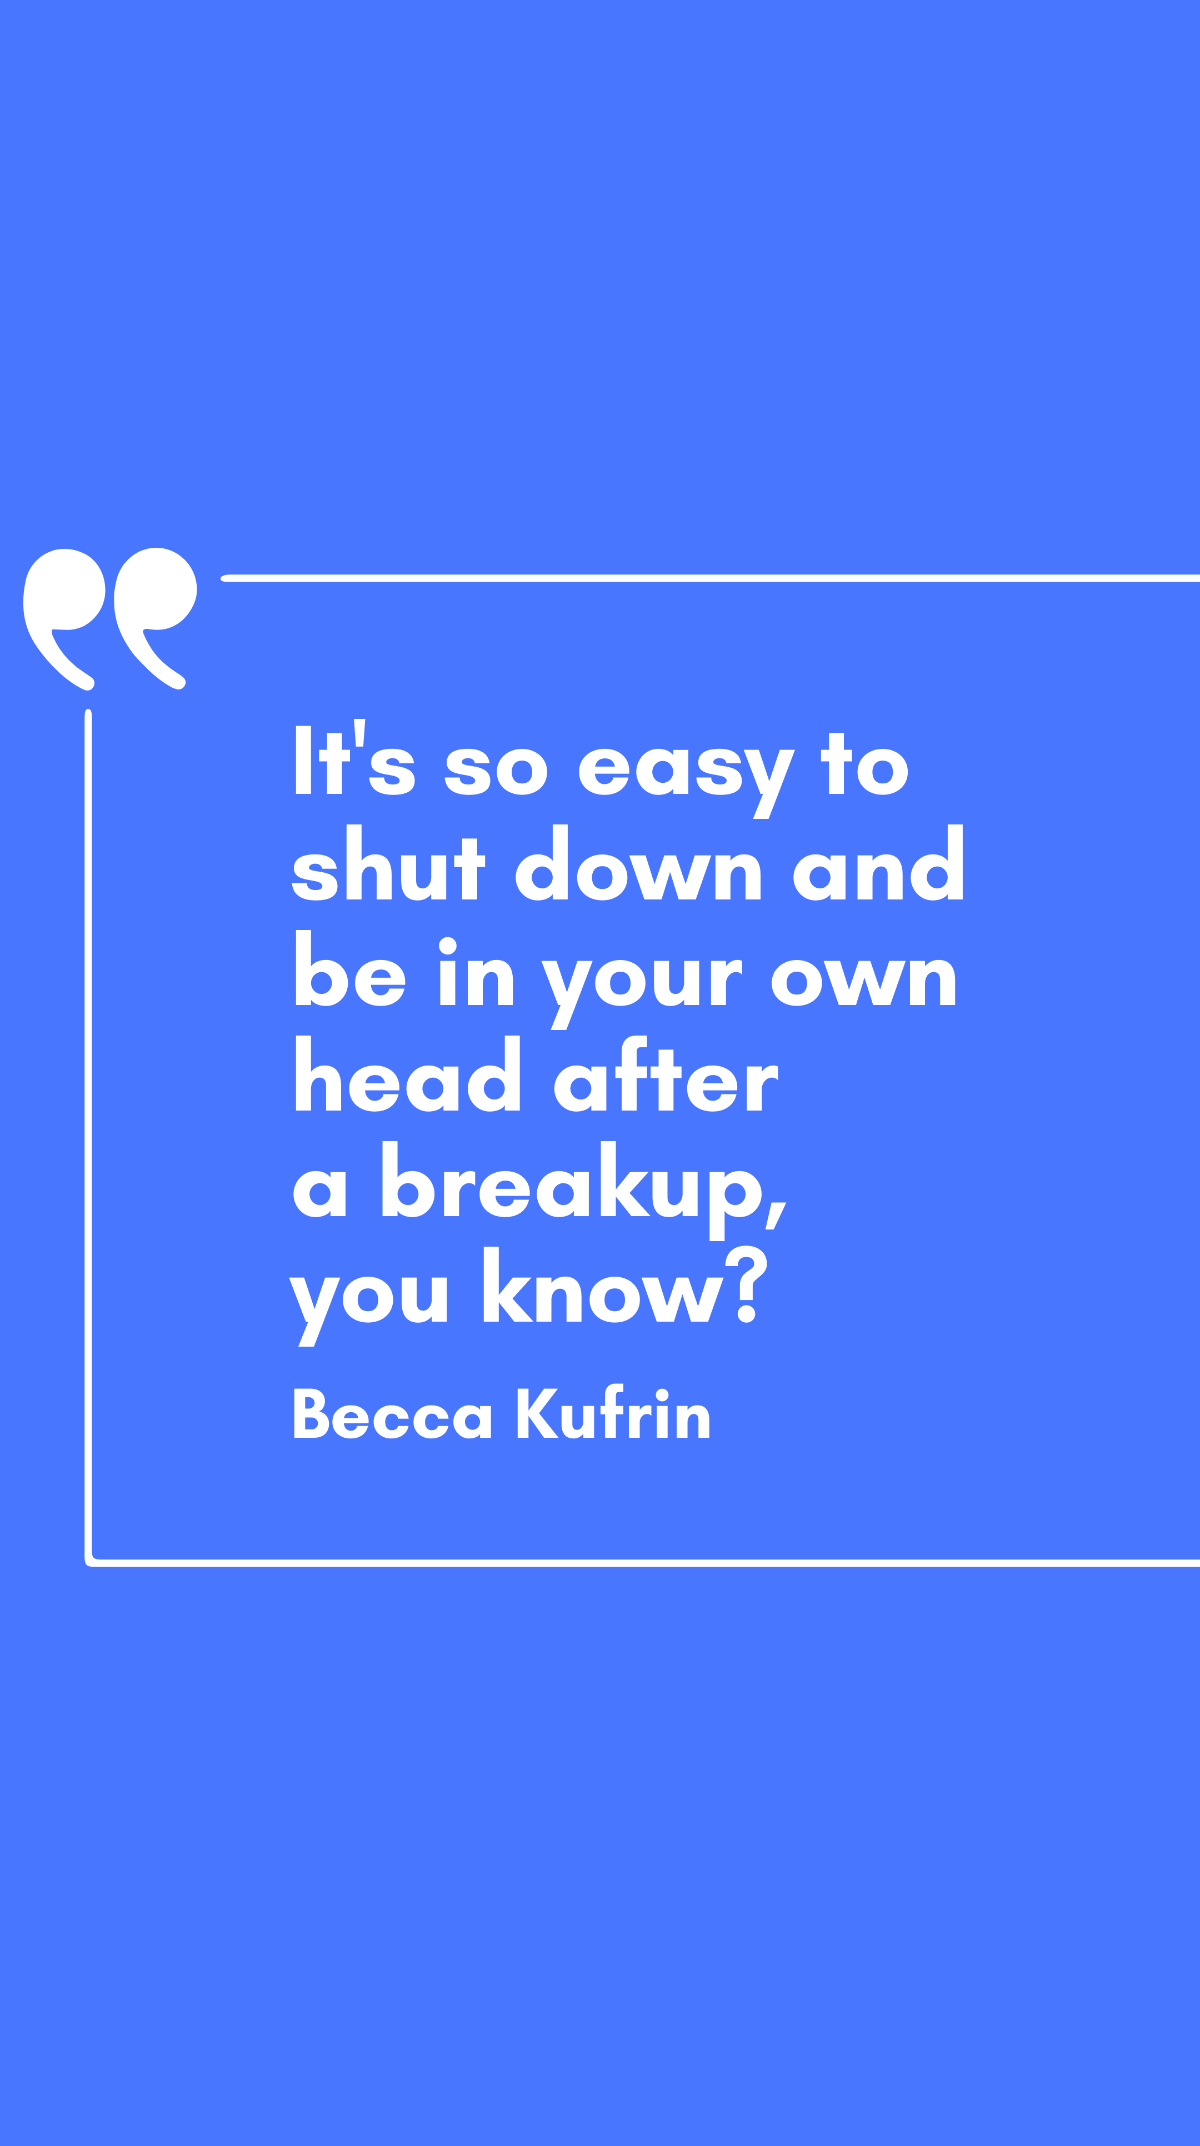 Becca Kufrin - It's so easy to shut down and be in your own head after a breakup, you know? Template